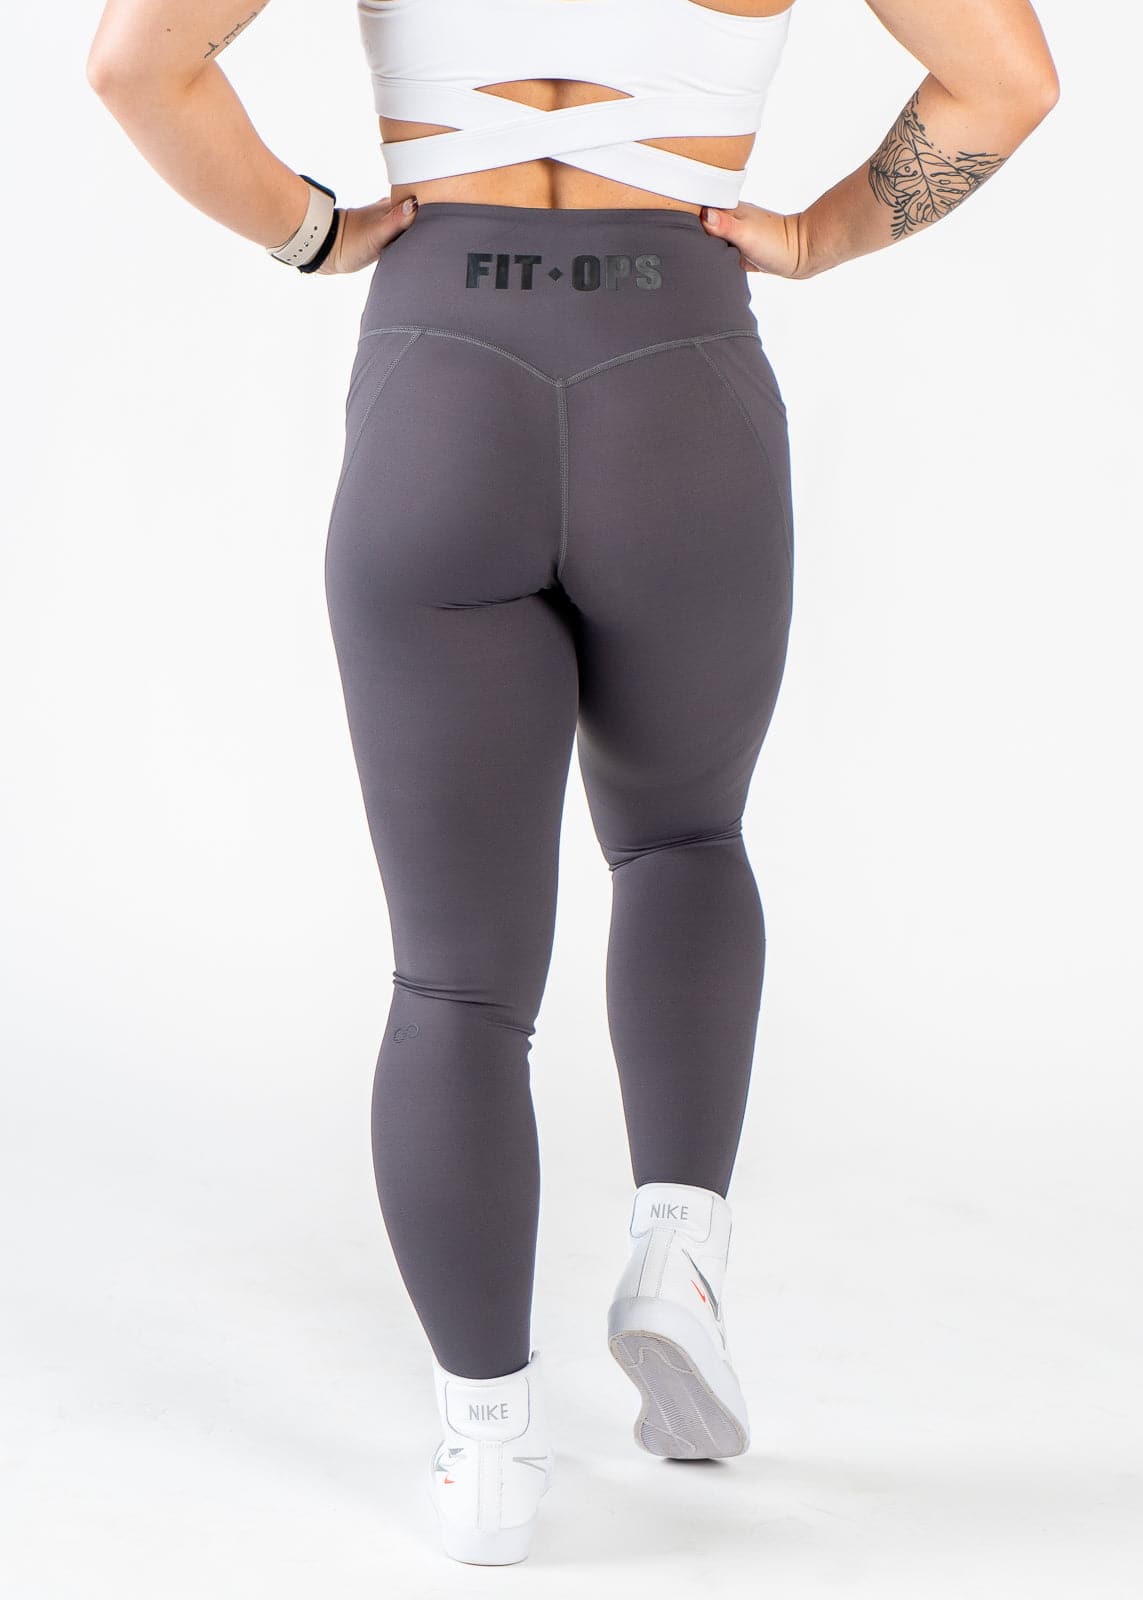 Chest Down Back View Hands on Hips Wearing Empowered Leggings x FIT OPS | Grey